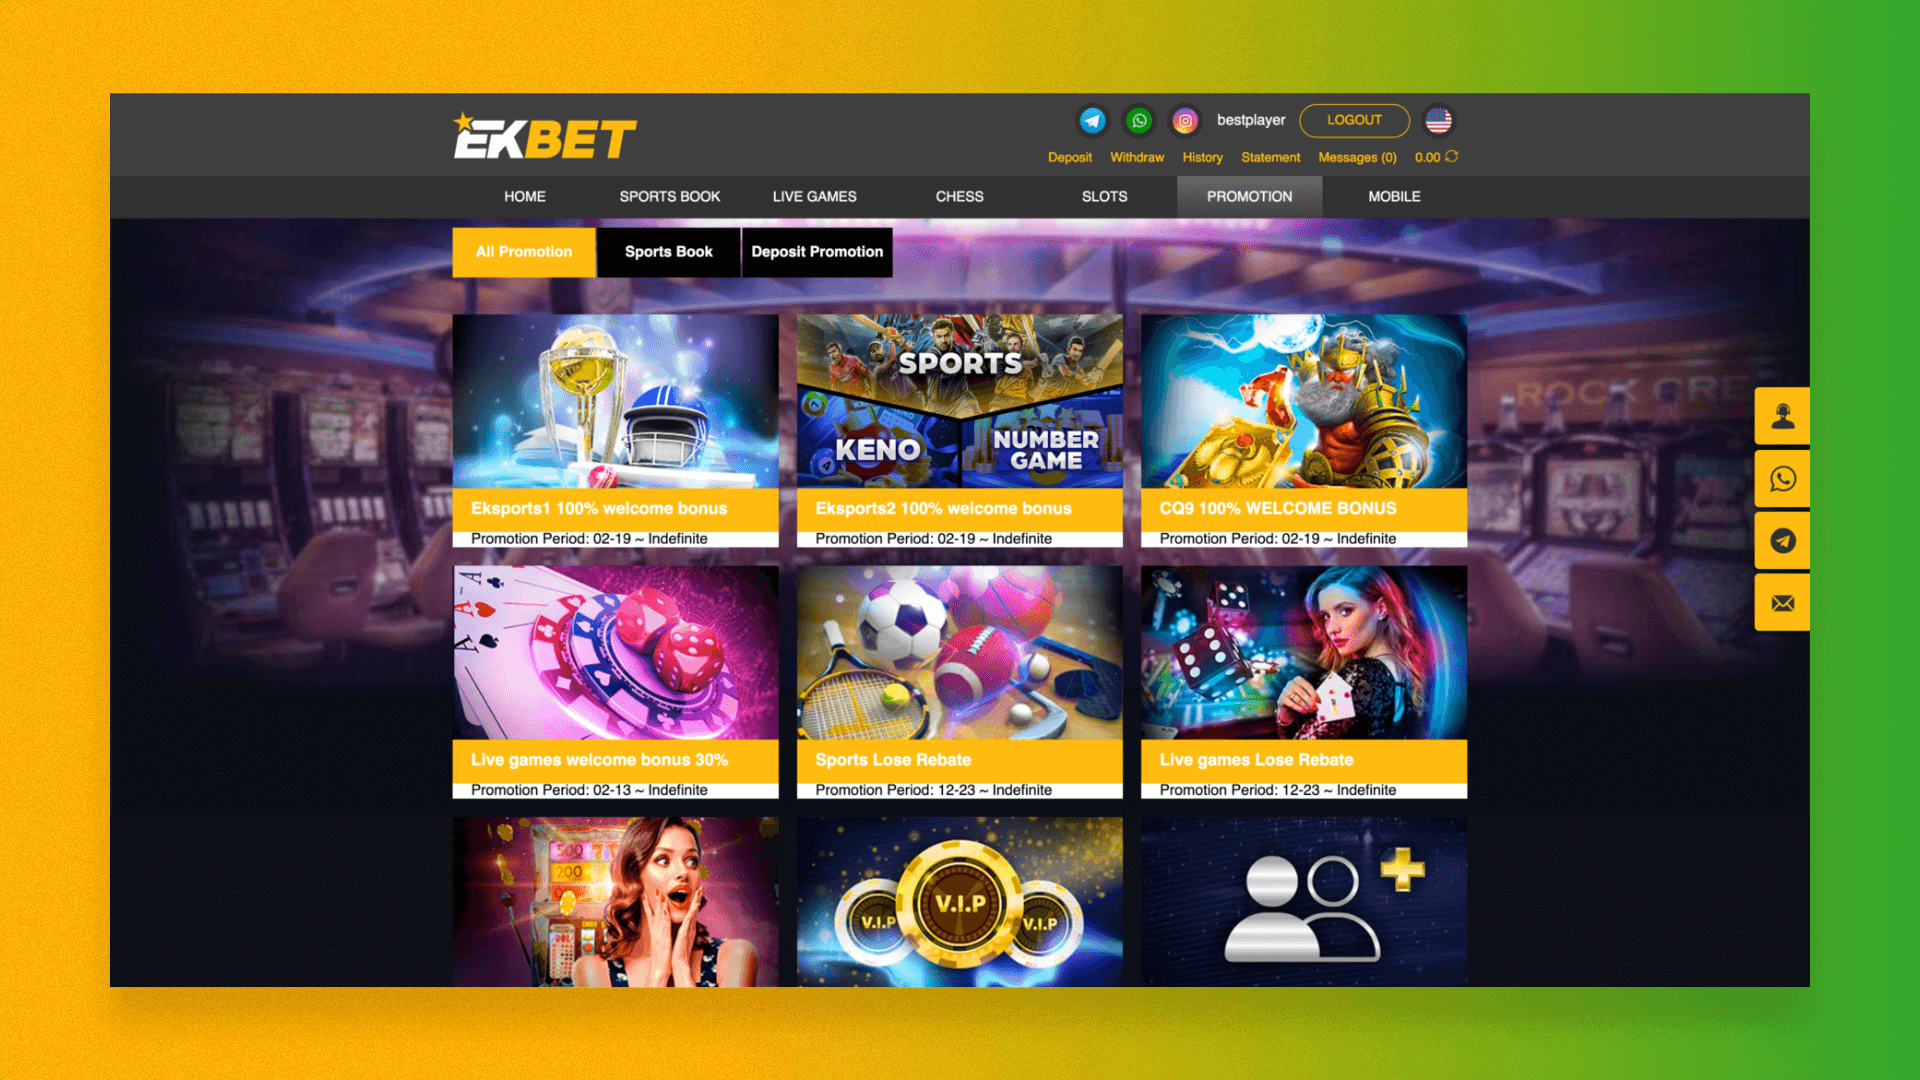 Page with current bonuses and promotions on the Ekbet website